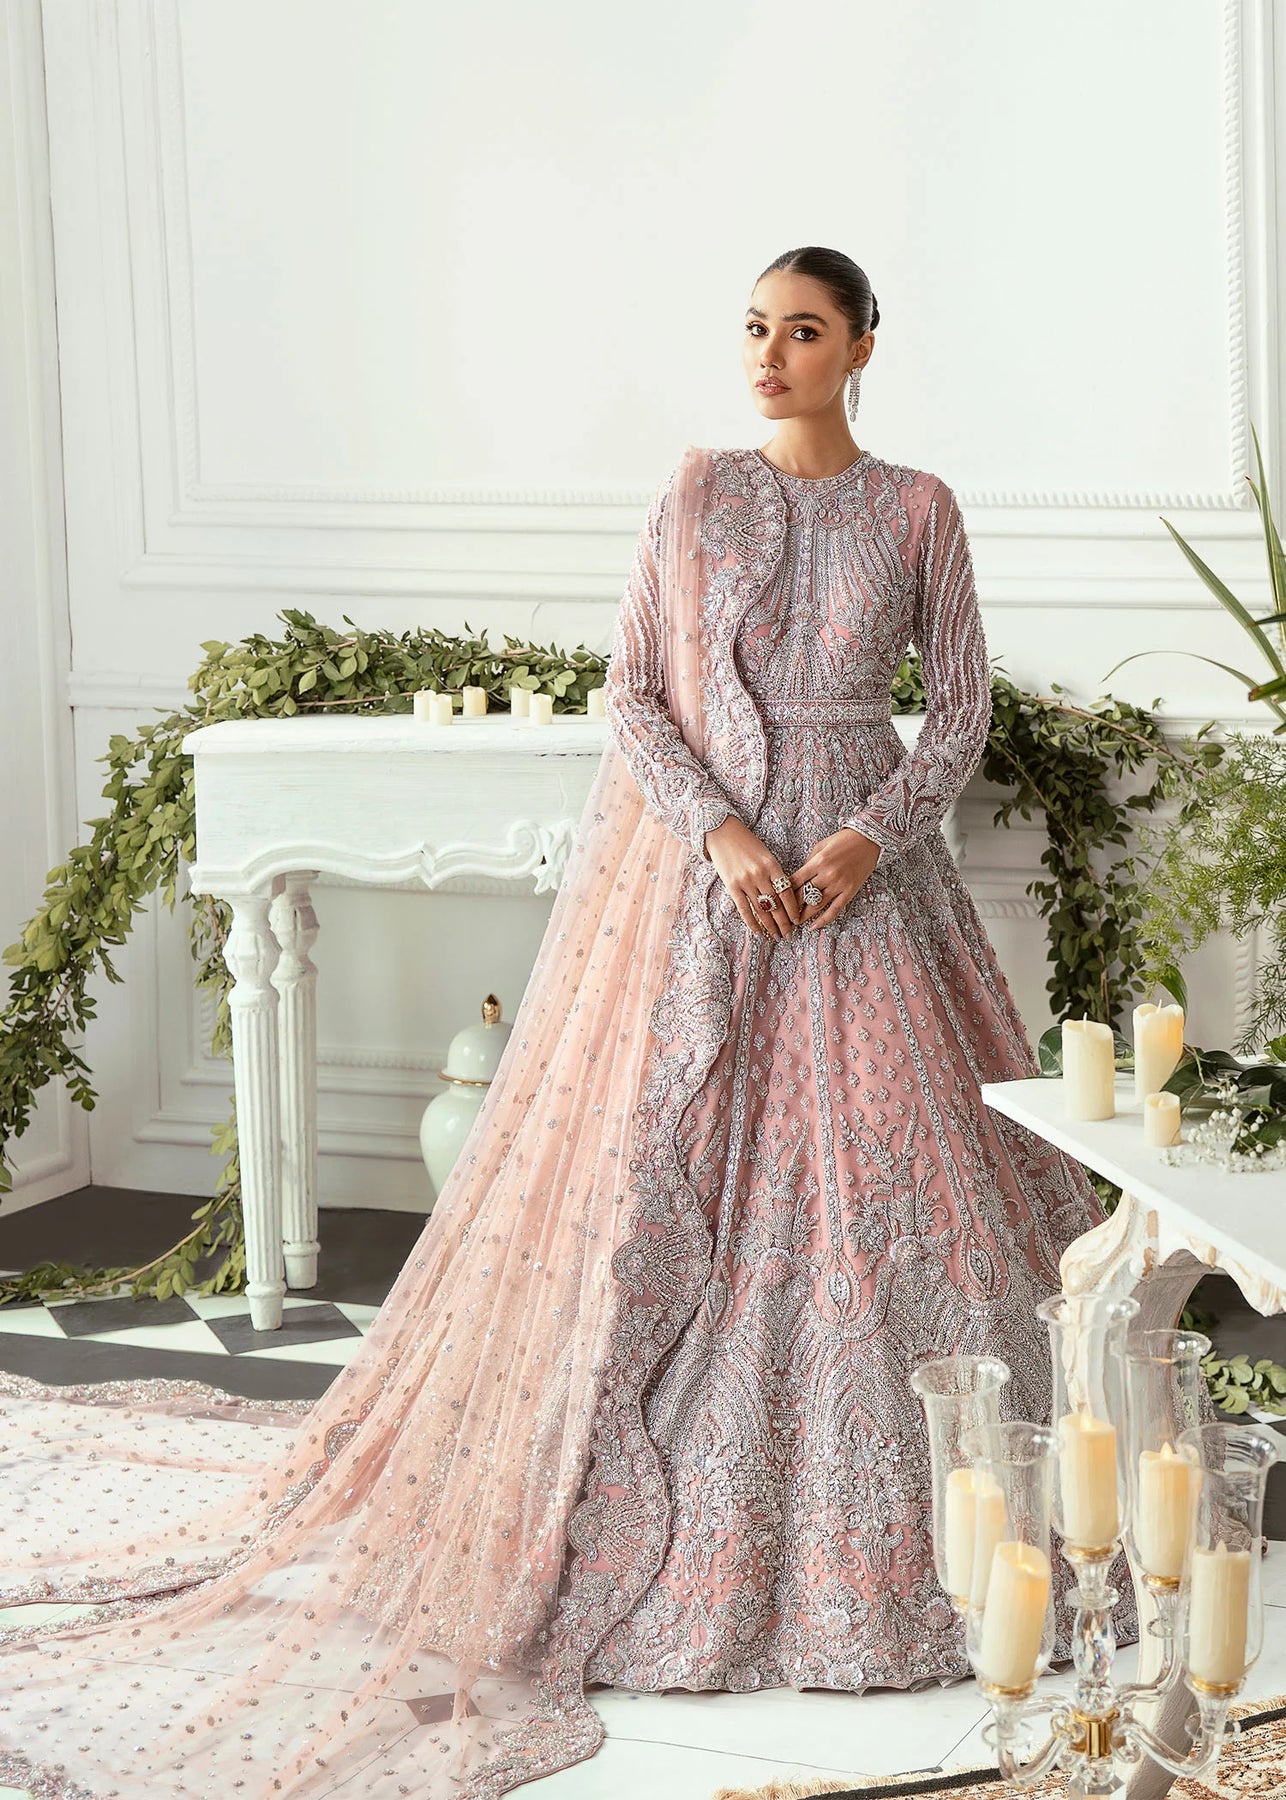 Akbar Aslam Exclusive Luxury Wedding Festive Unstitched Maxi Hyacinth [ ONE WEEK FOR DELIVERY ]